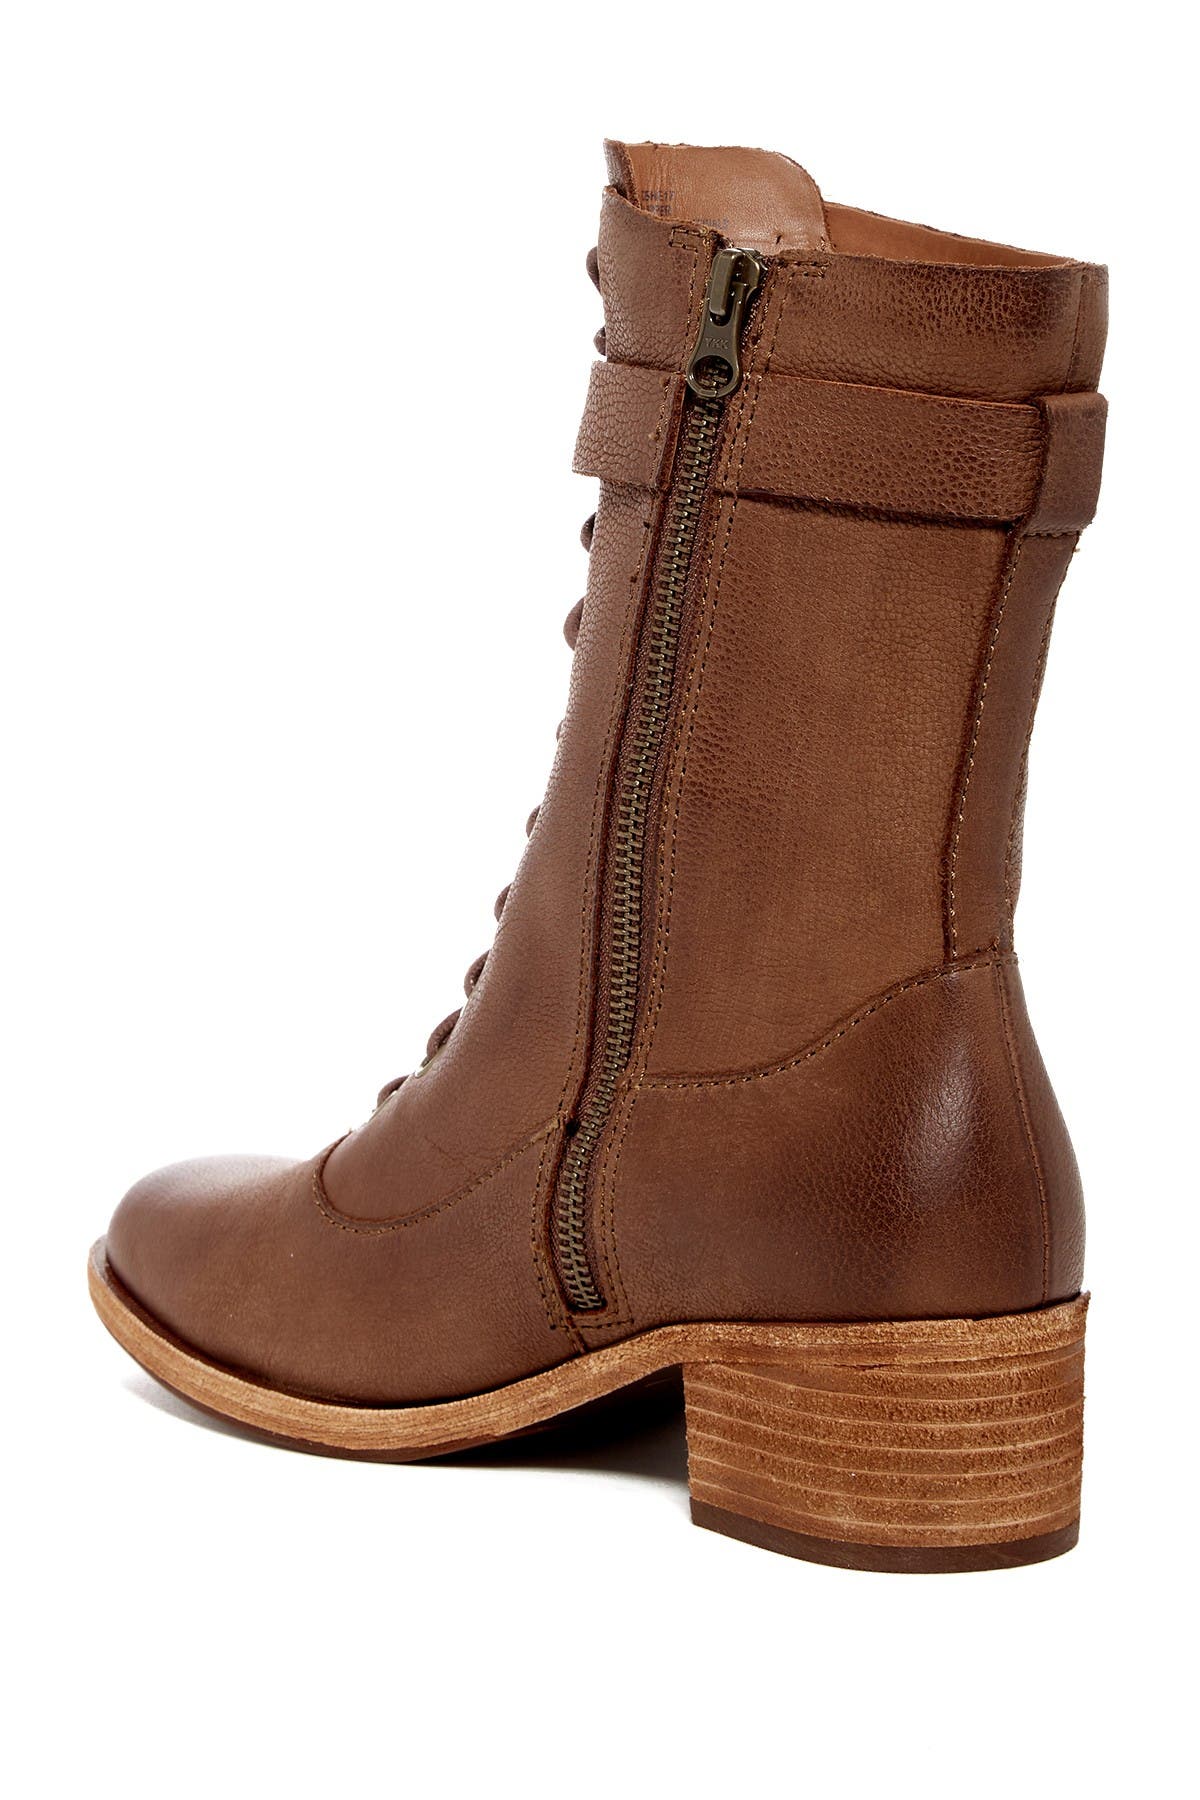 kork ease lace up boots